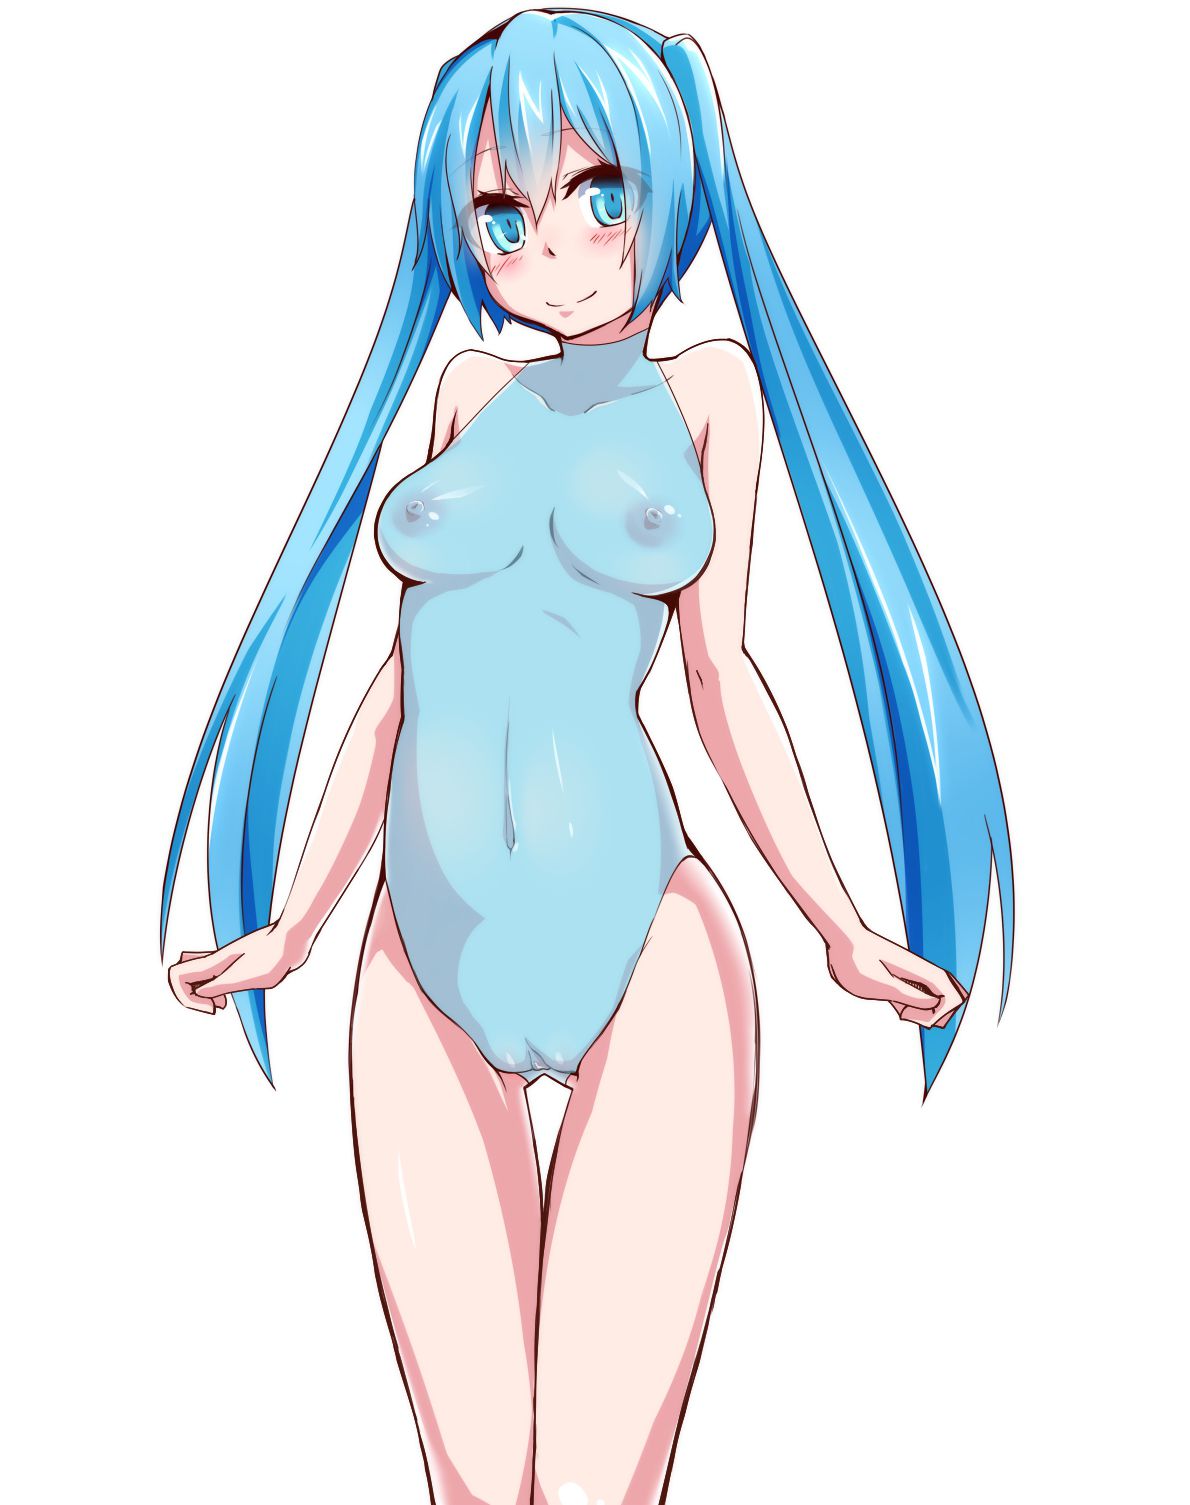 Erotic image that can be pulled out just by imagining hatsune Miku's masturbation figure [vocalist lloyd] 7